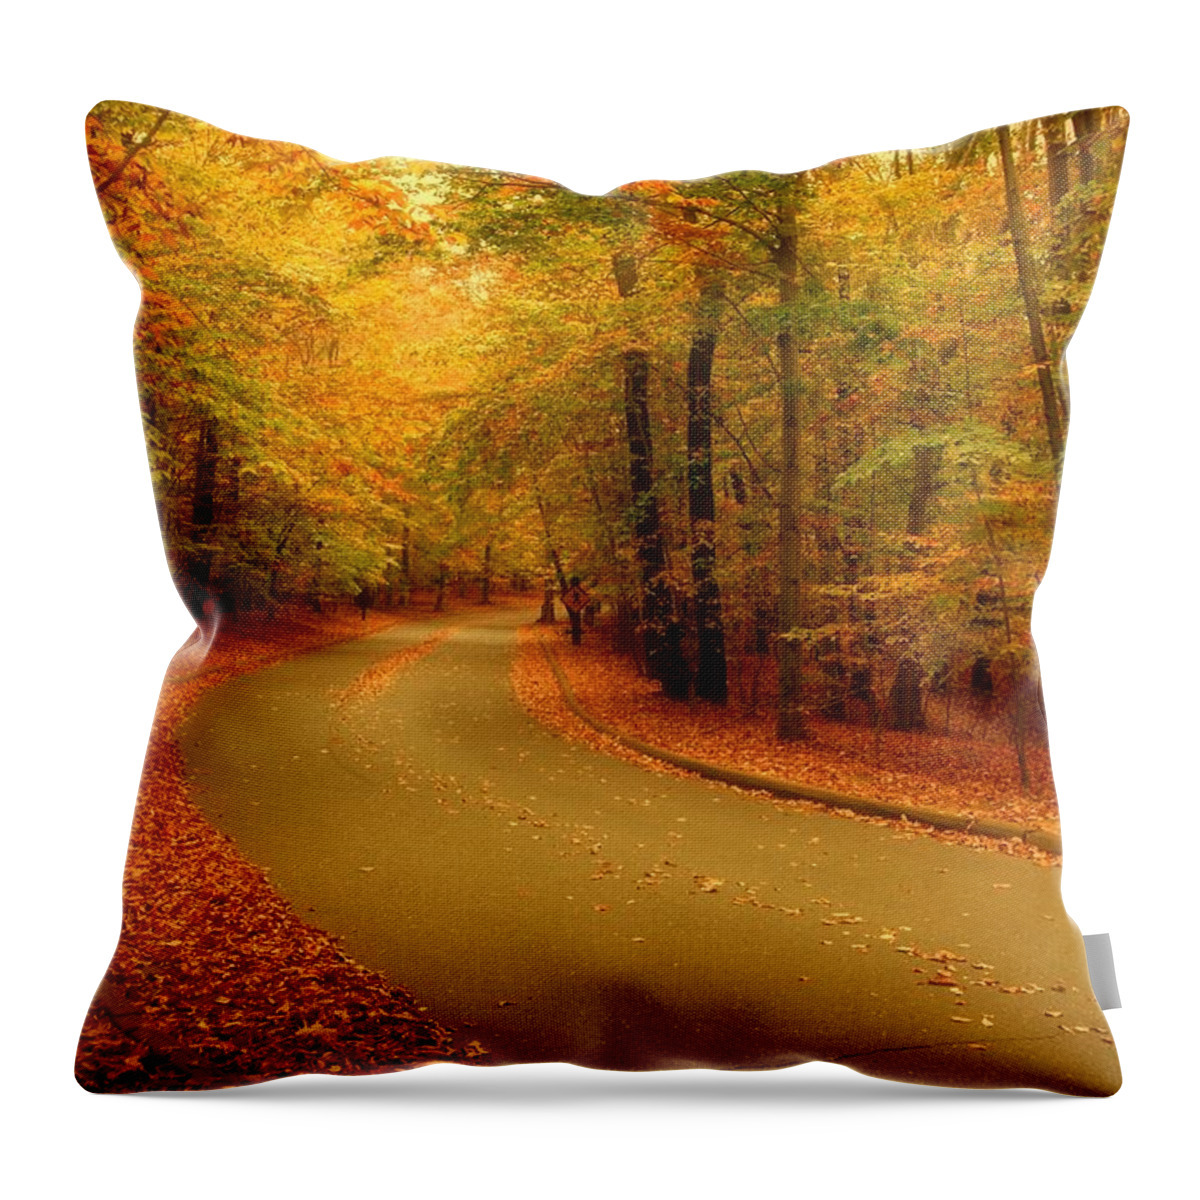 Autumn Landscapes Throw Pillow featuring the photograph Autumn Serenity - Holmdel Park by Angie Tirado